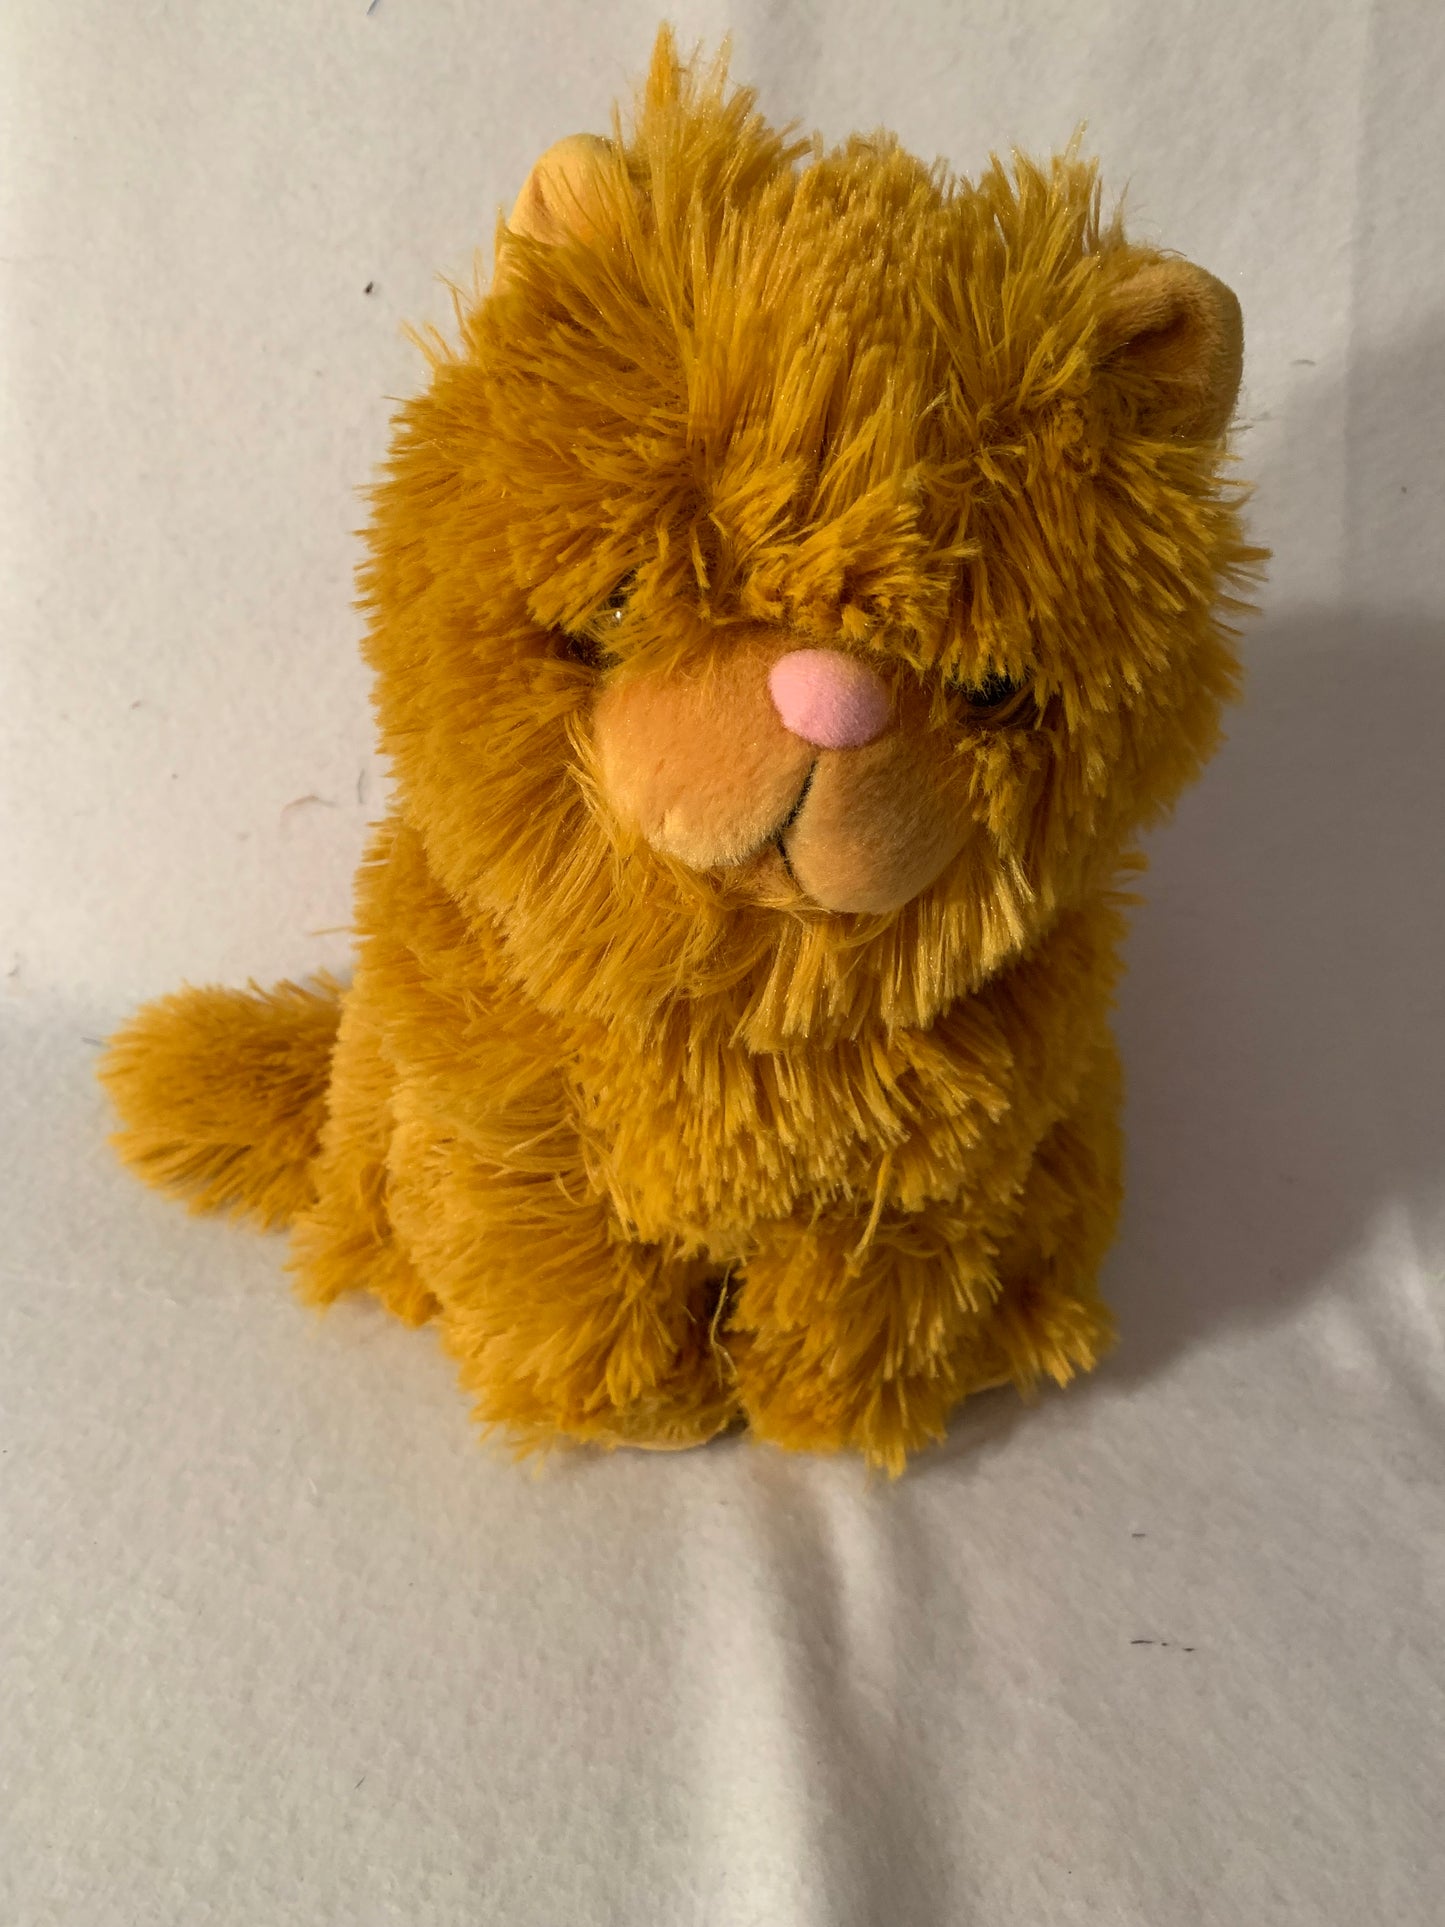 Weighted stuffed animal, wizard owl, dog or cat with 4 lbs, weighted plush buddy, washable, ready to ship, Harry, Aunt Sandy's Sewing